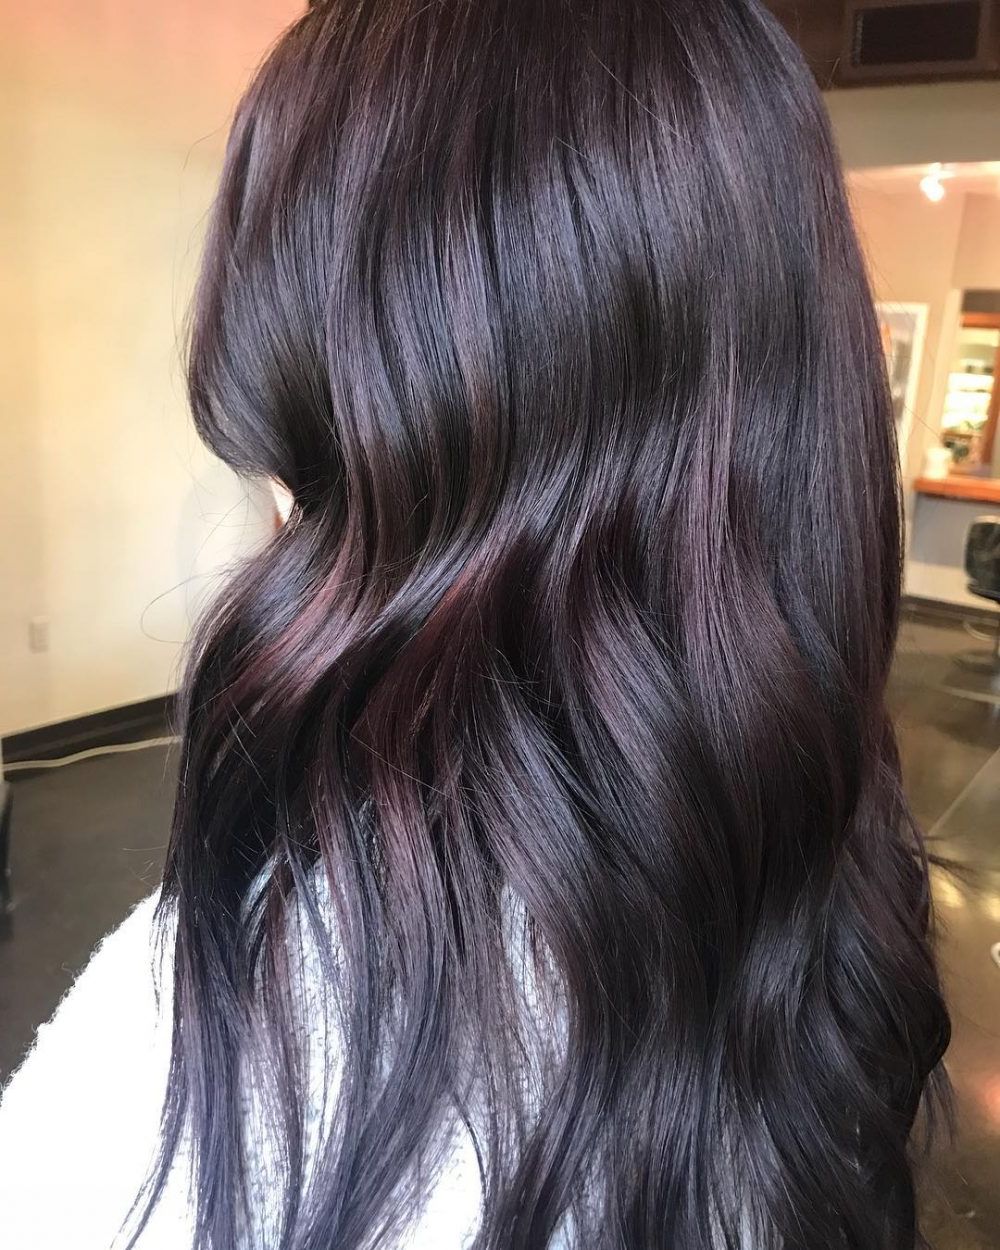 29 Flattering Dark Hair Colors For Every Skin Tone In 2018 Within Disheveled Burgundy Brown Bob Hairstyles (View 20 of 25)